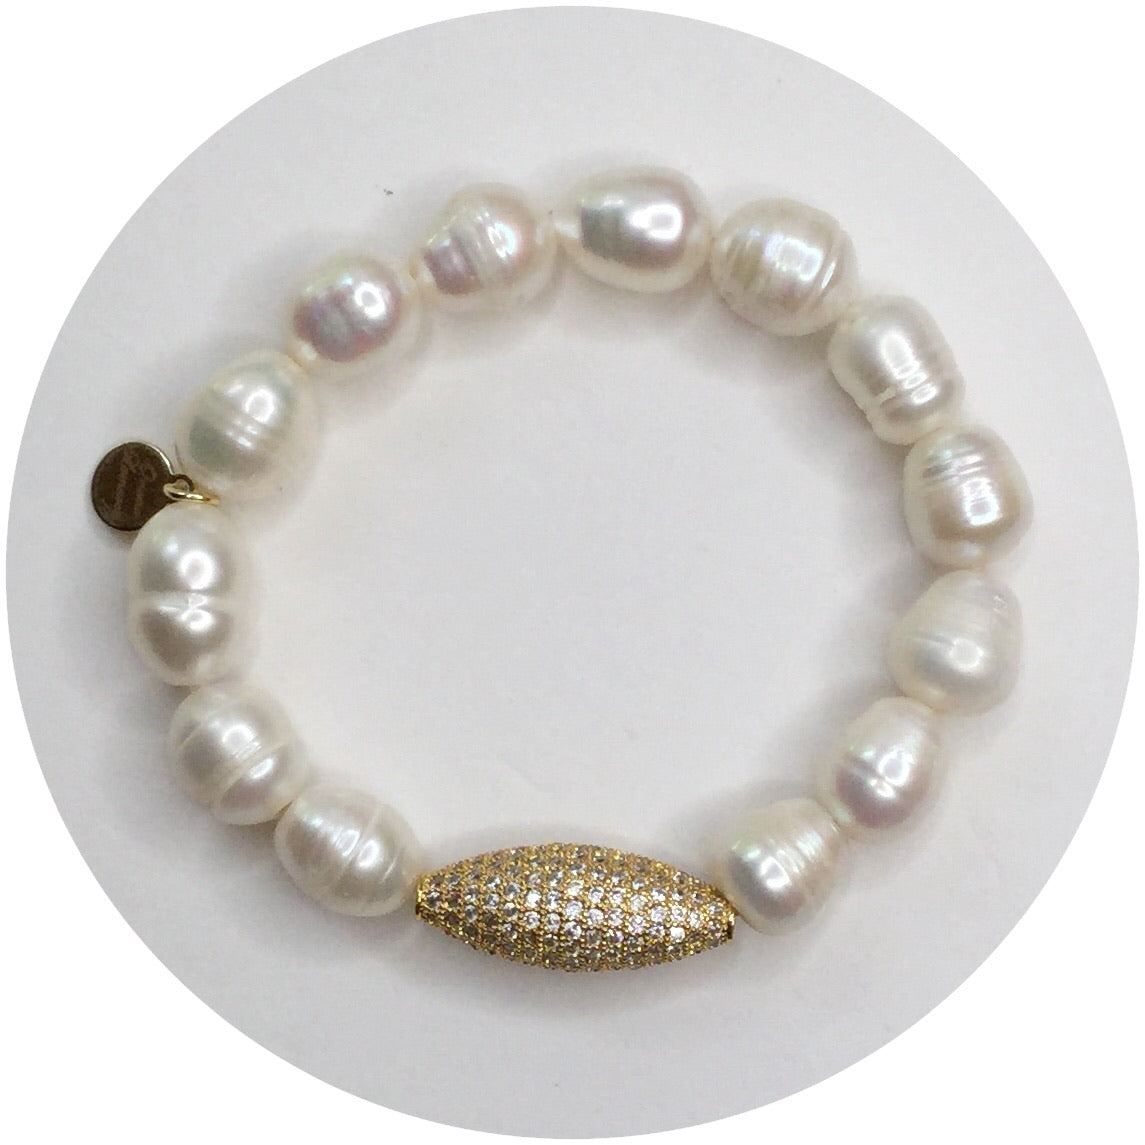 Freshwater Pearls with Pavé Gold Dome - Oriana Lamarca LLC